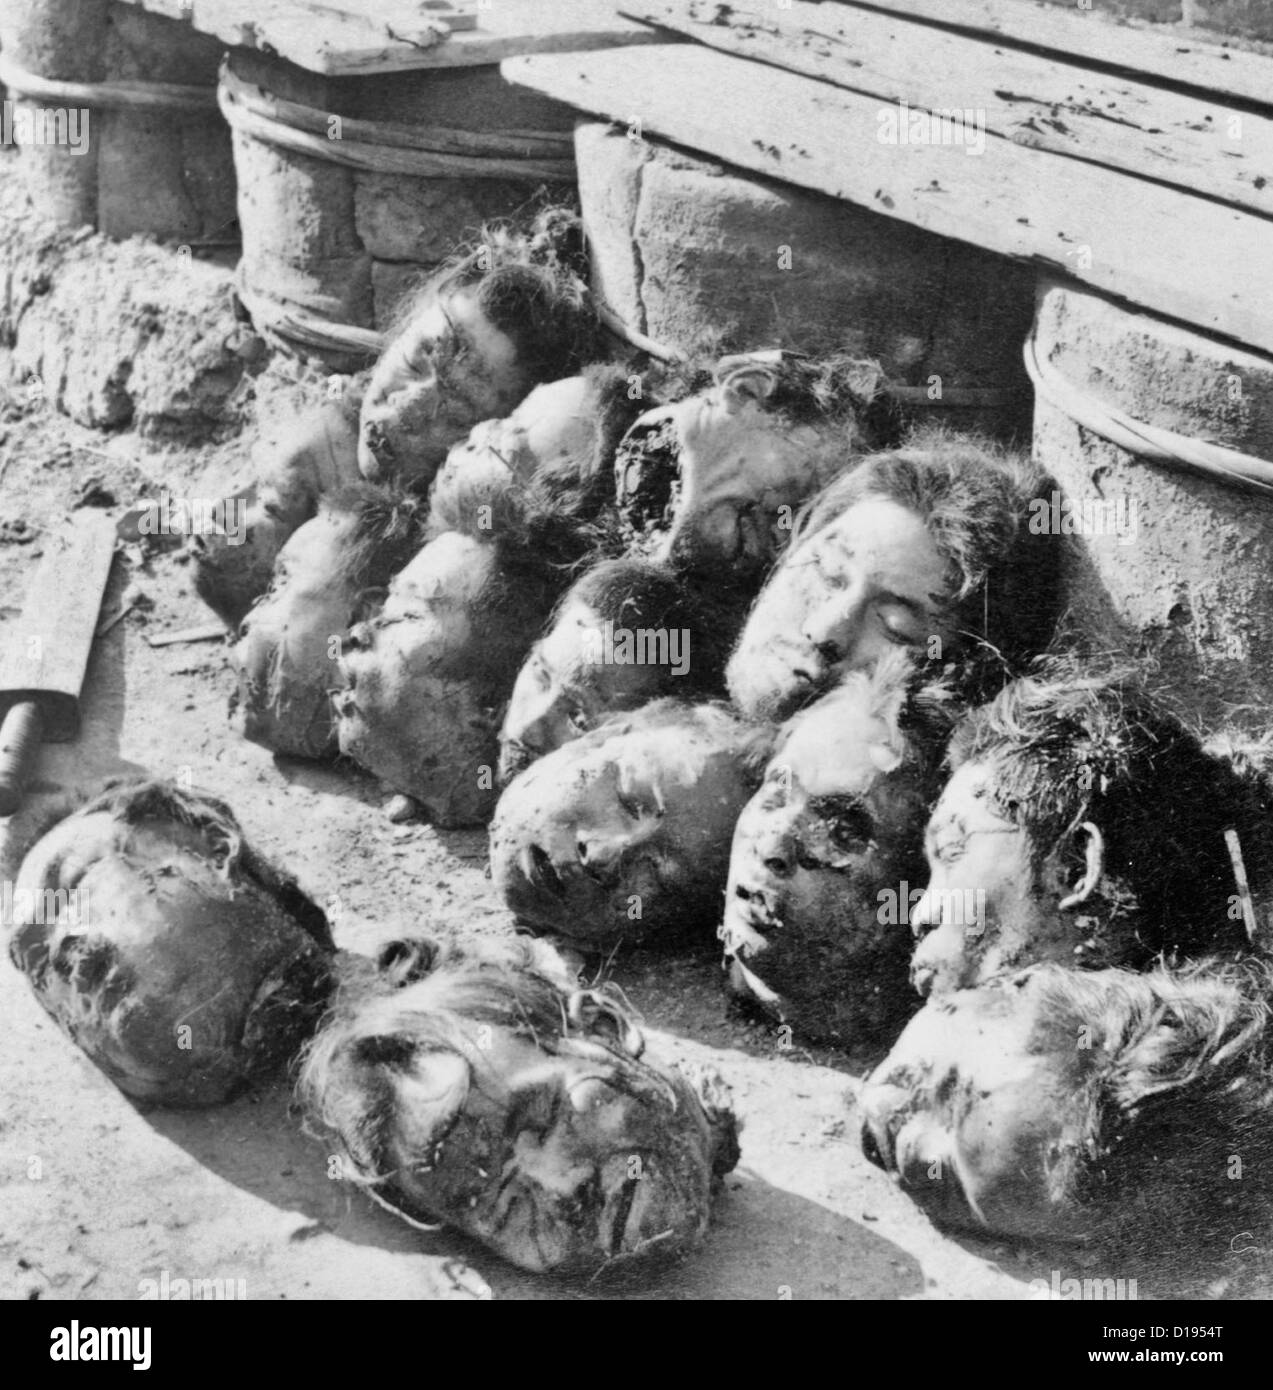 After the execution, Canton prison, China - Decapitated heads scattered on the ground. After the Boxer Rebellion, 1901 Stock Photo